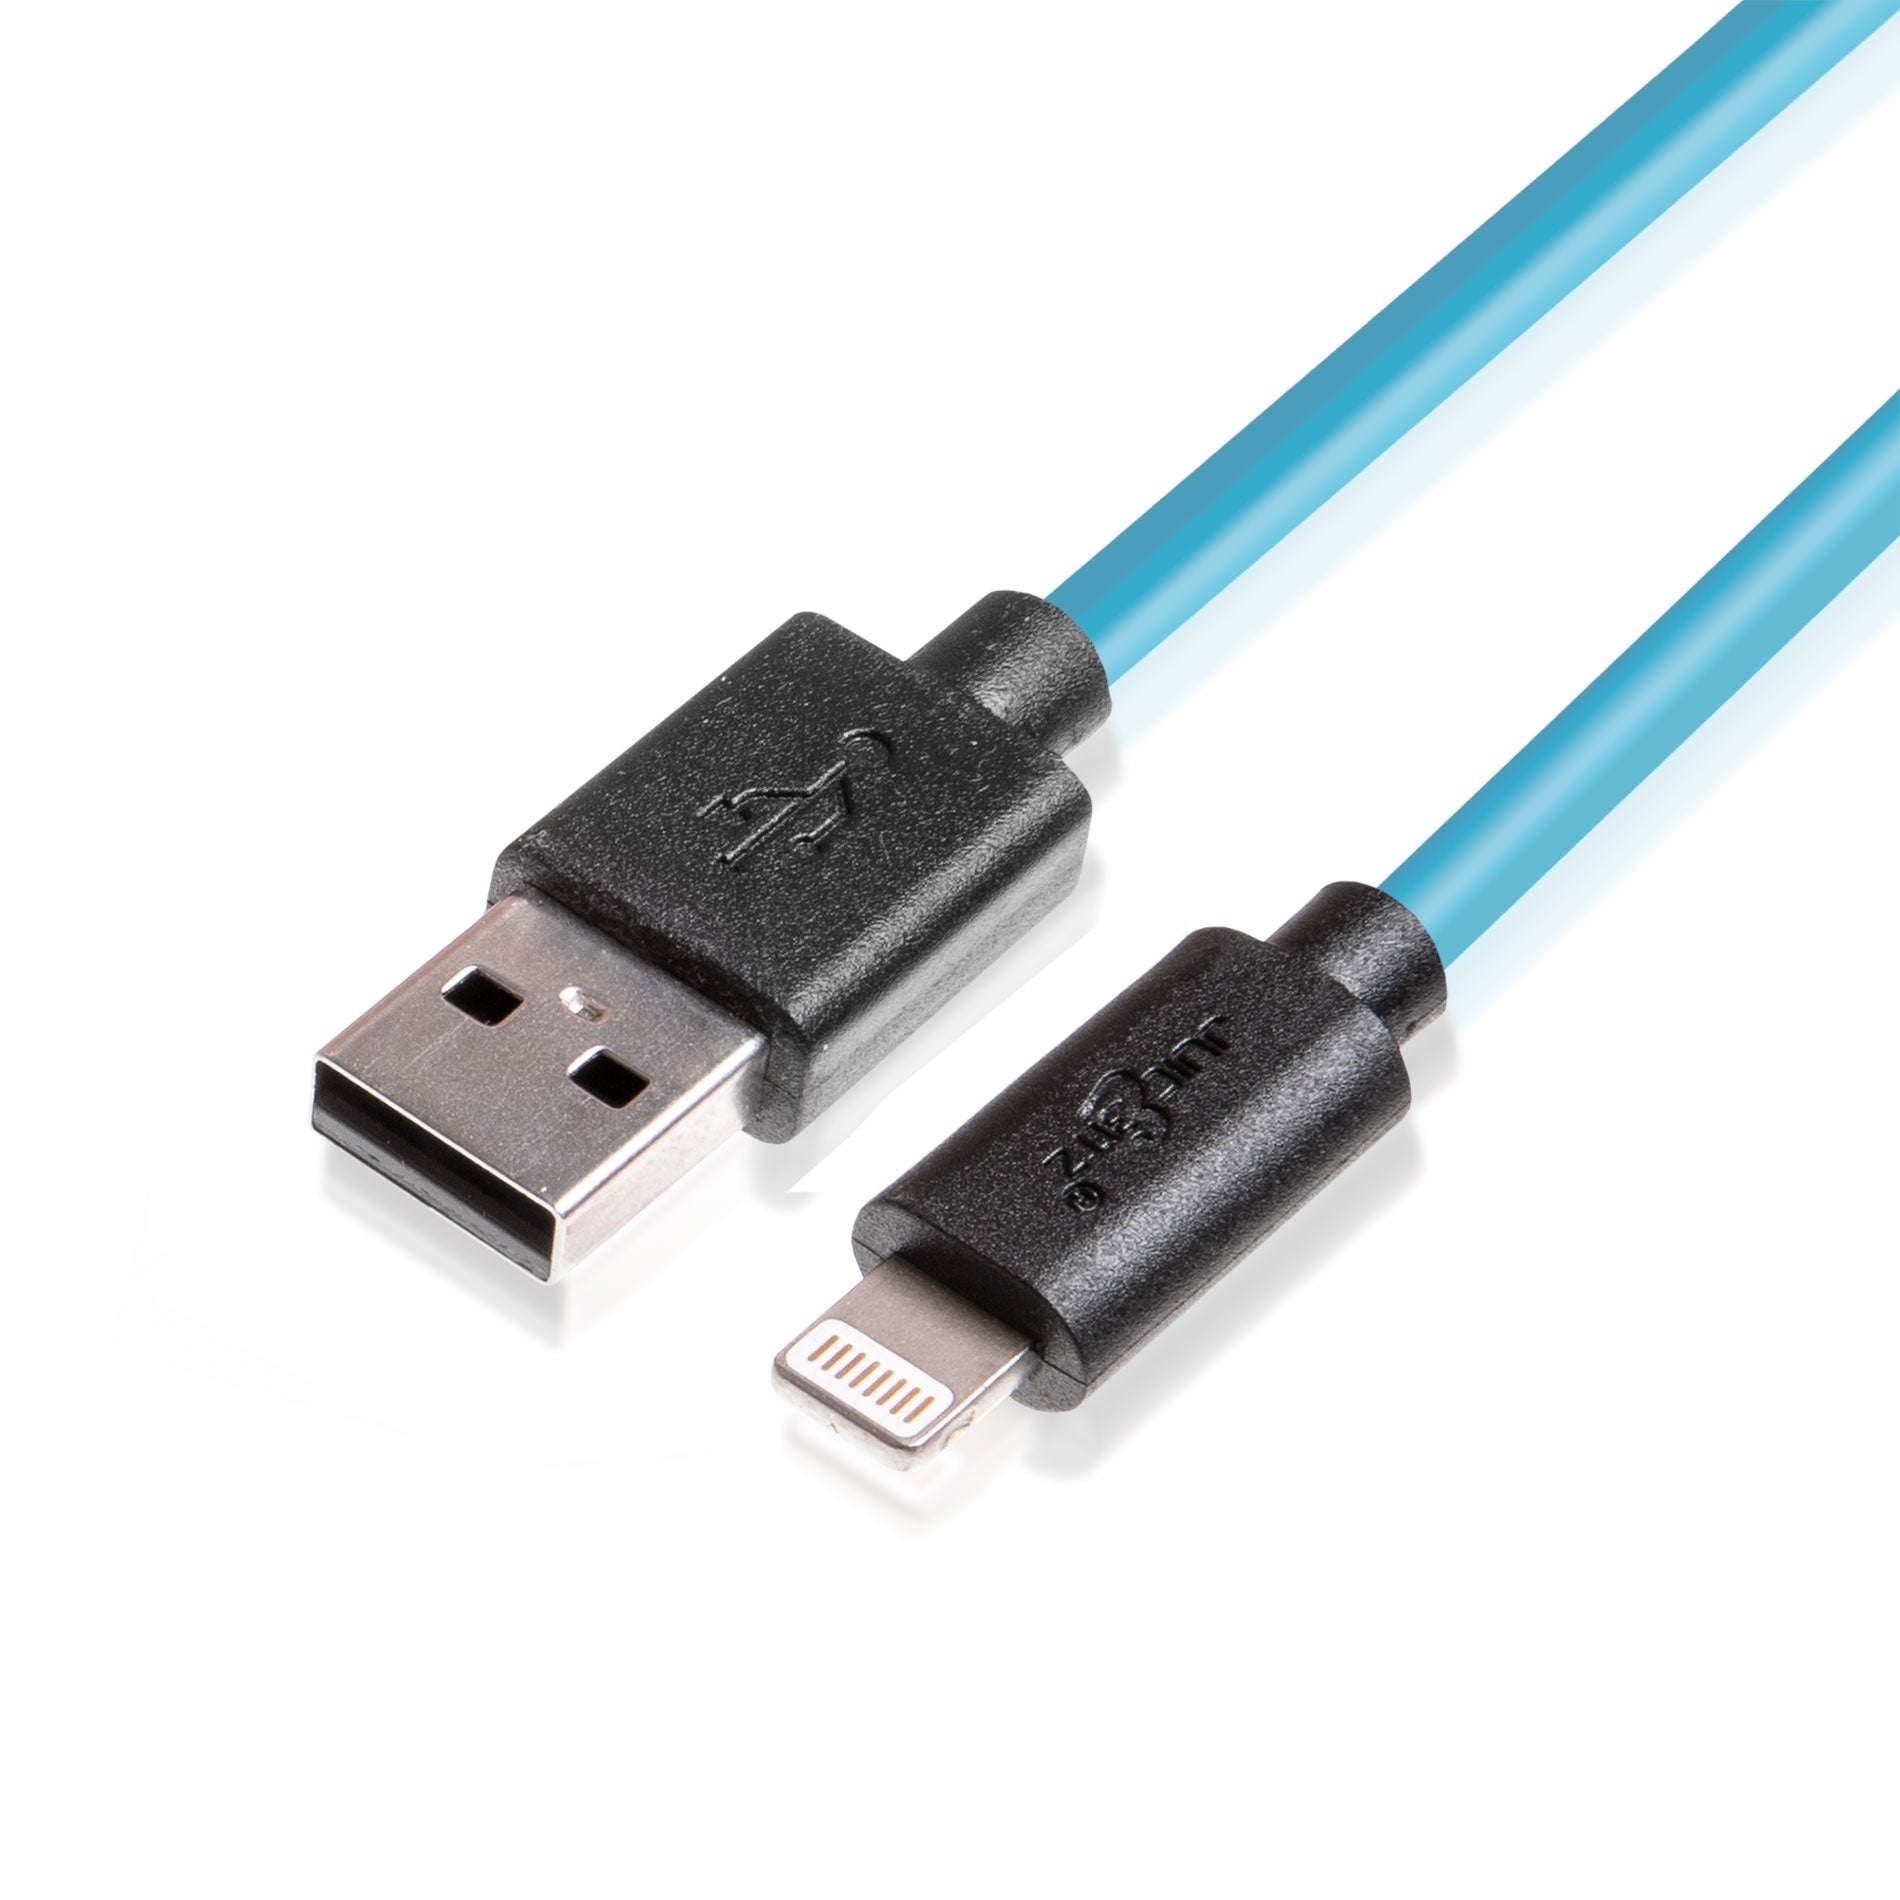 USB Charger Cable Data Sync Lead for iPhone, iPad, iPod - Blue